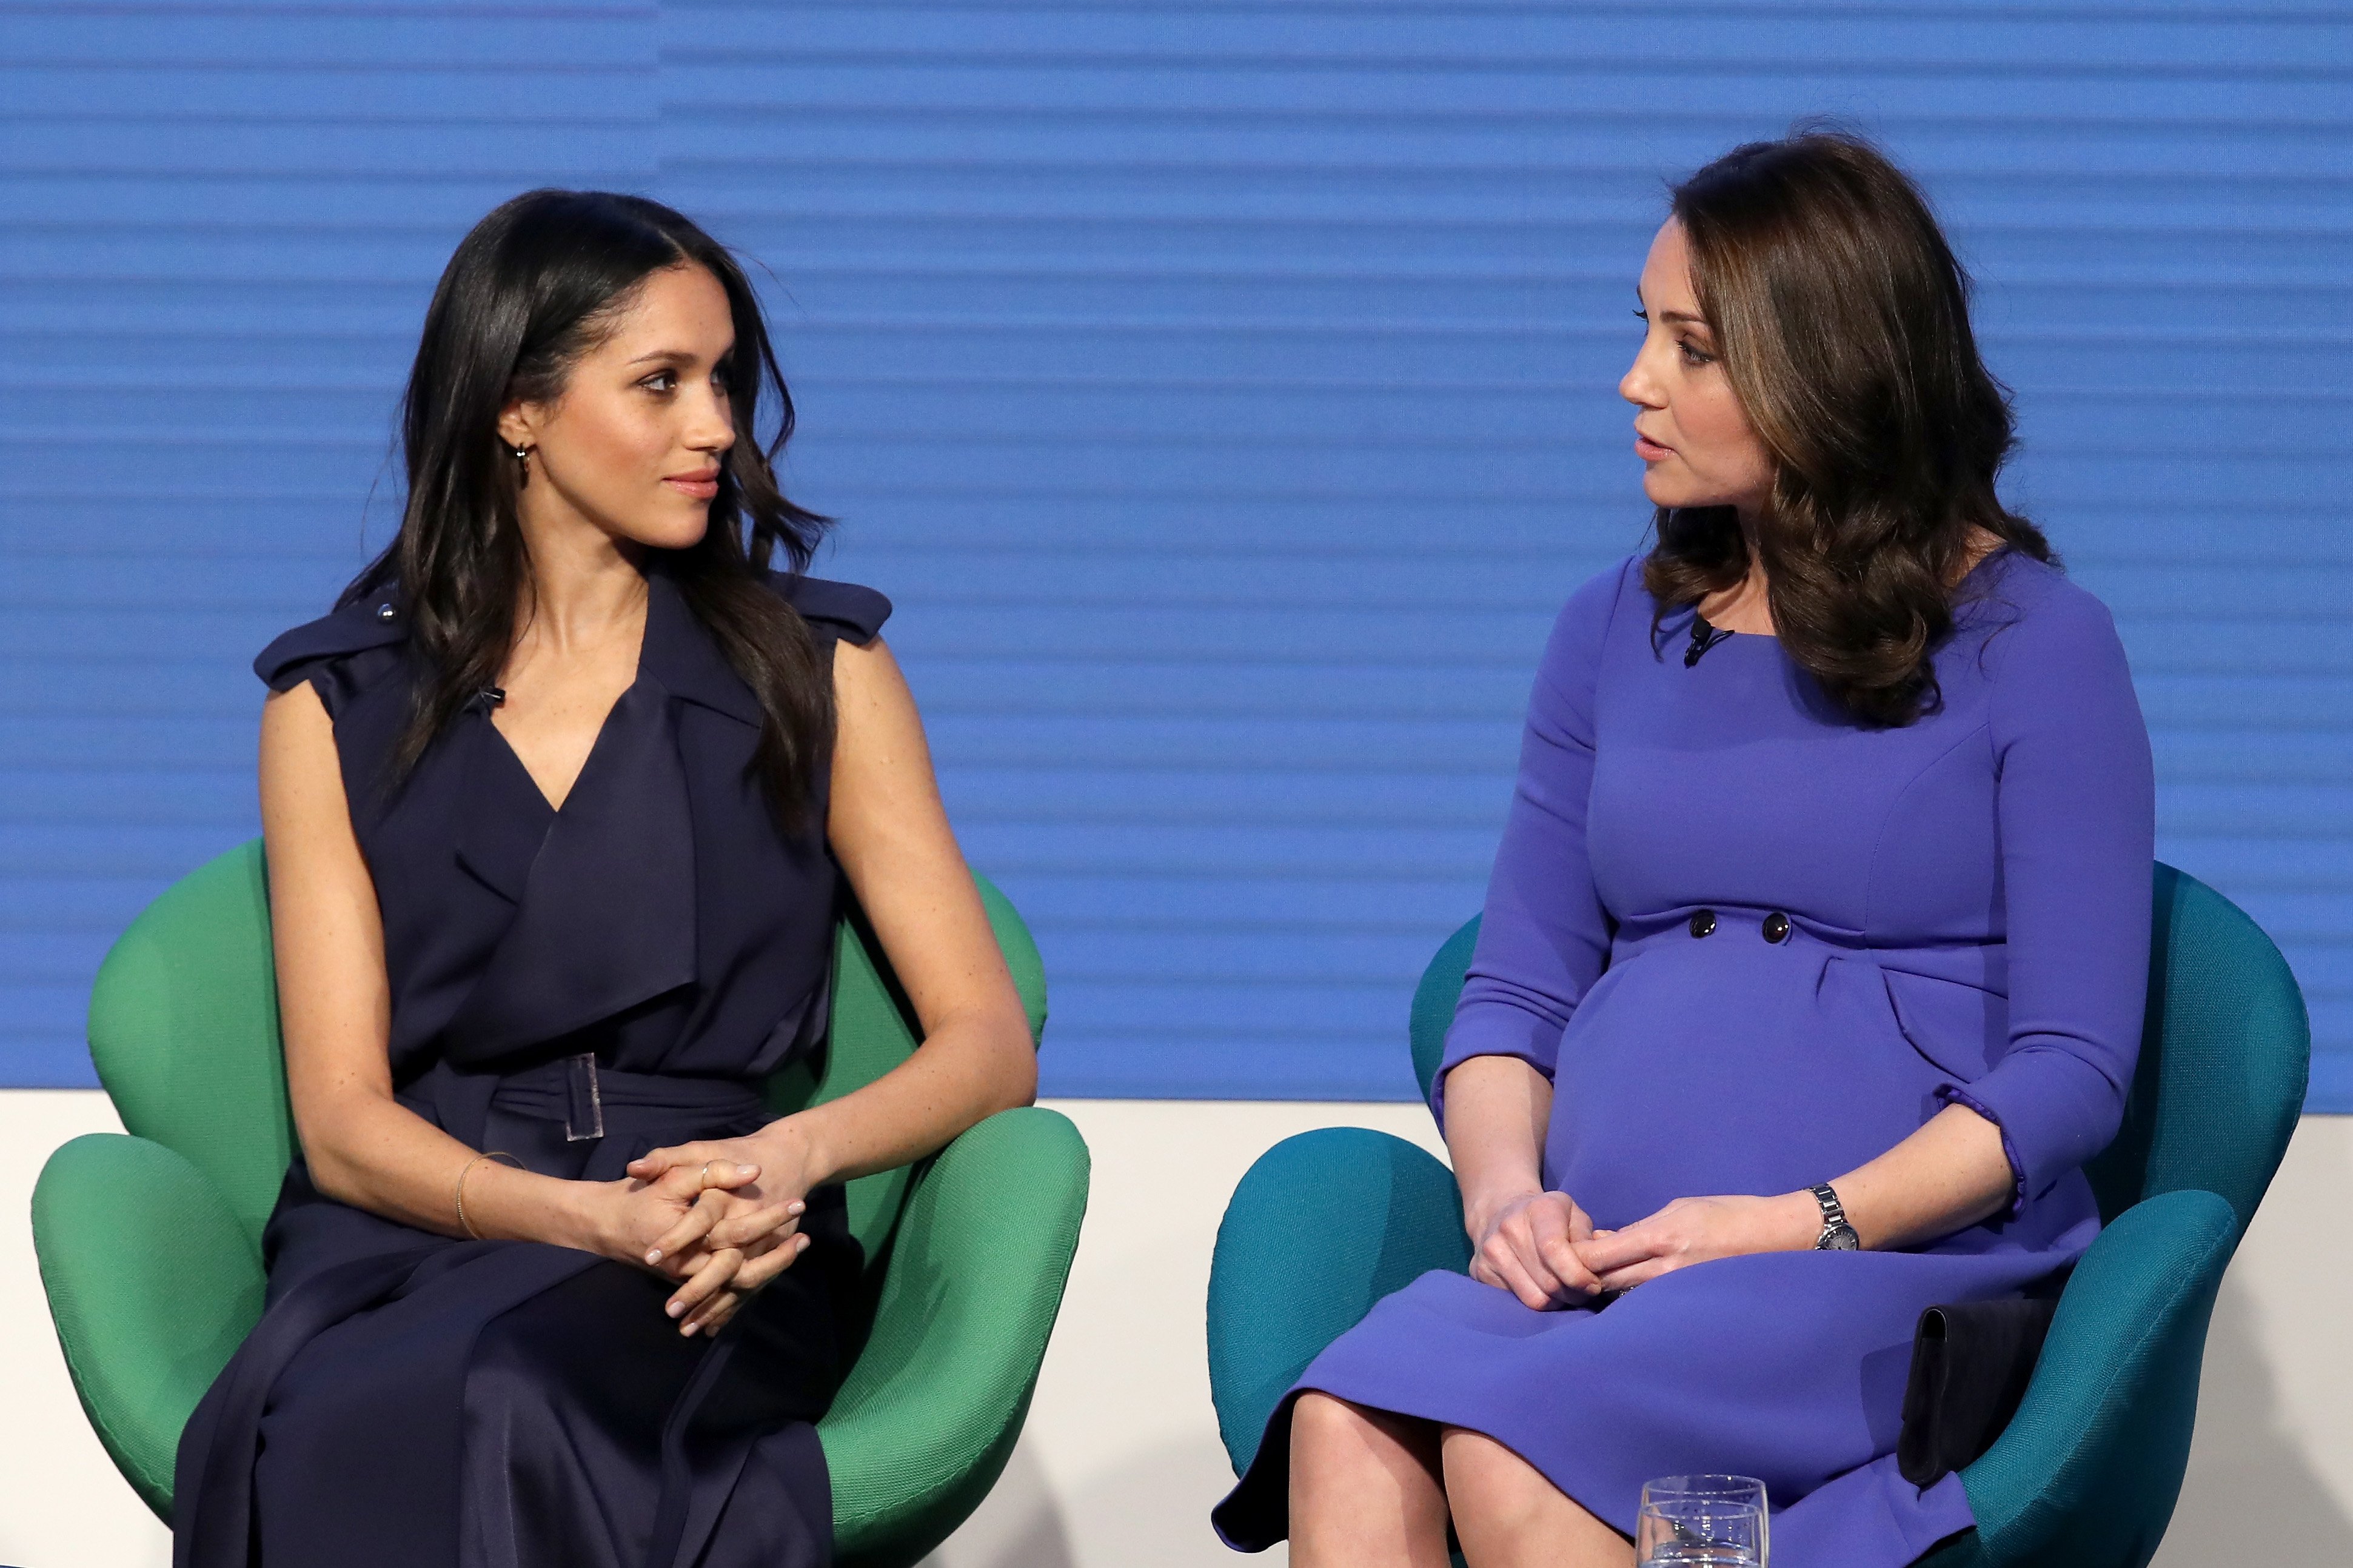 Meghan Markle and Kate Middleton, who was reportedly "mortified by Meghan's claims, onstage at the first Royal Foundation Forum